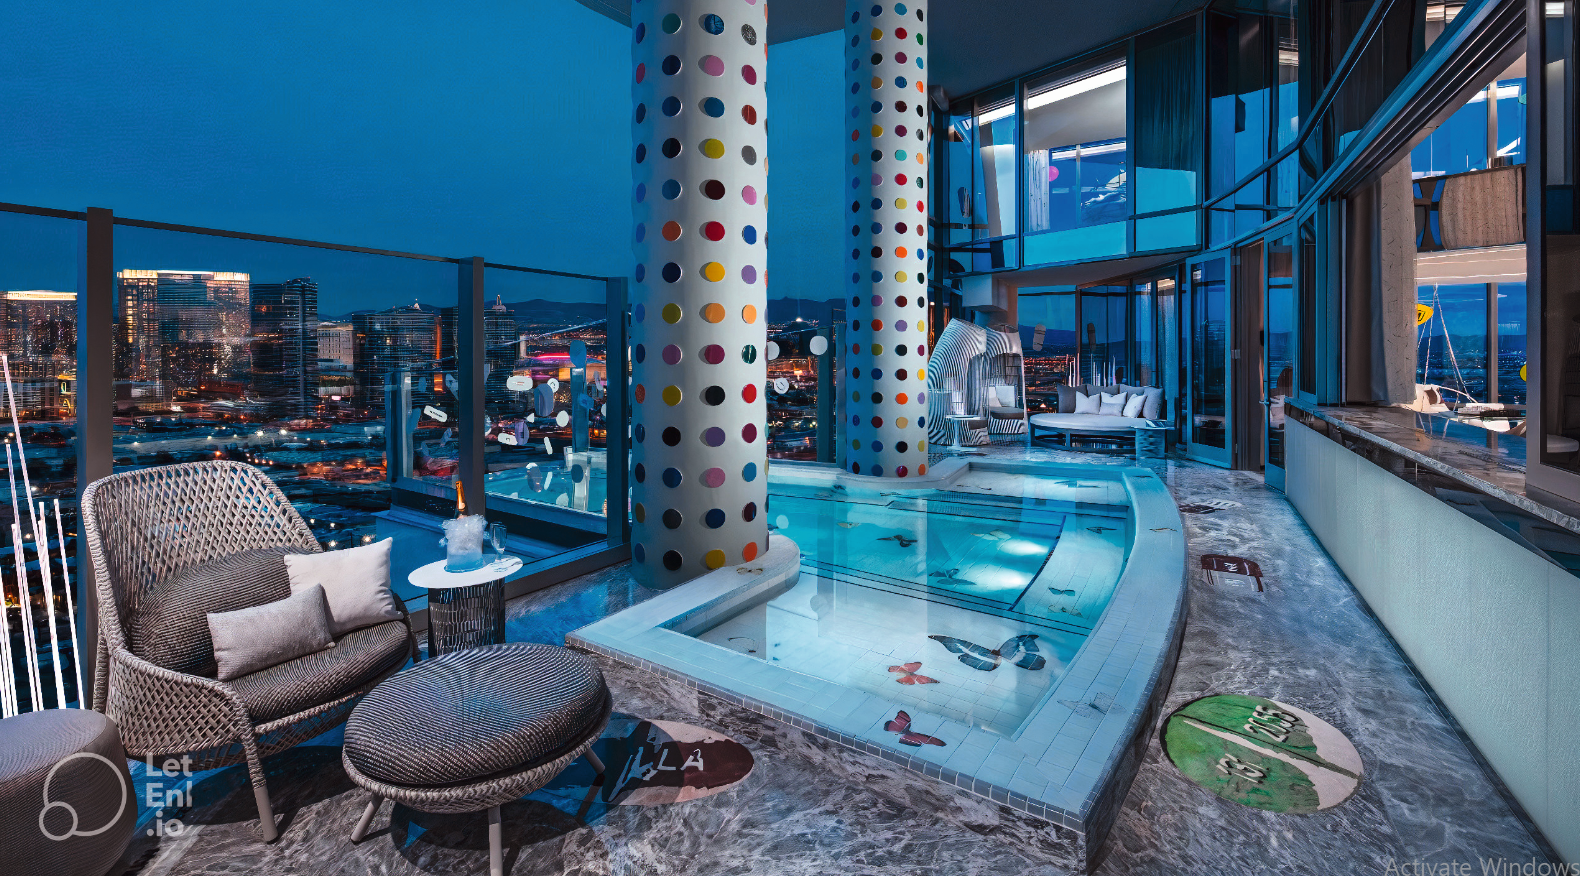 Private pool of the second most expensive hotel room in the world at the Palms Casino Resort, Las Vegas